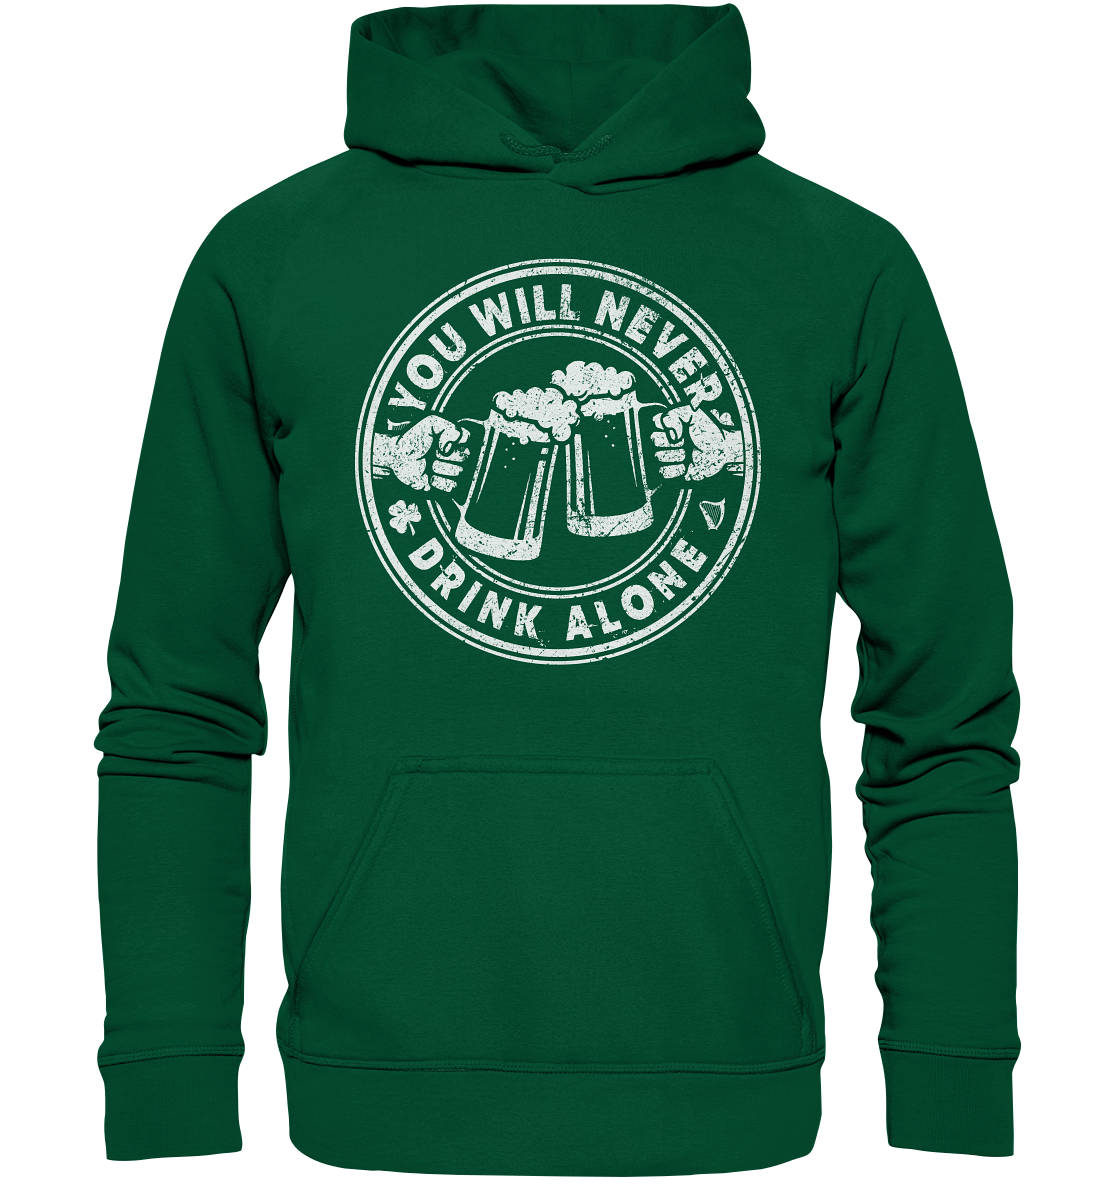 You will never drink alone - Basic Unisex Hoodie